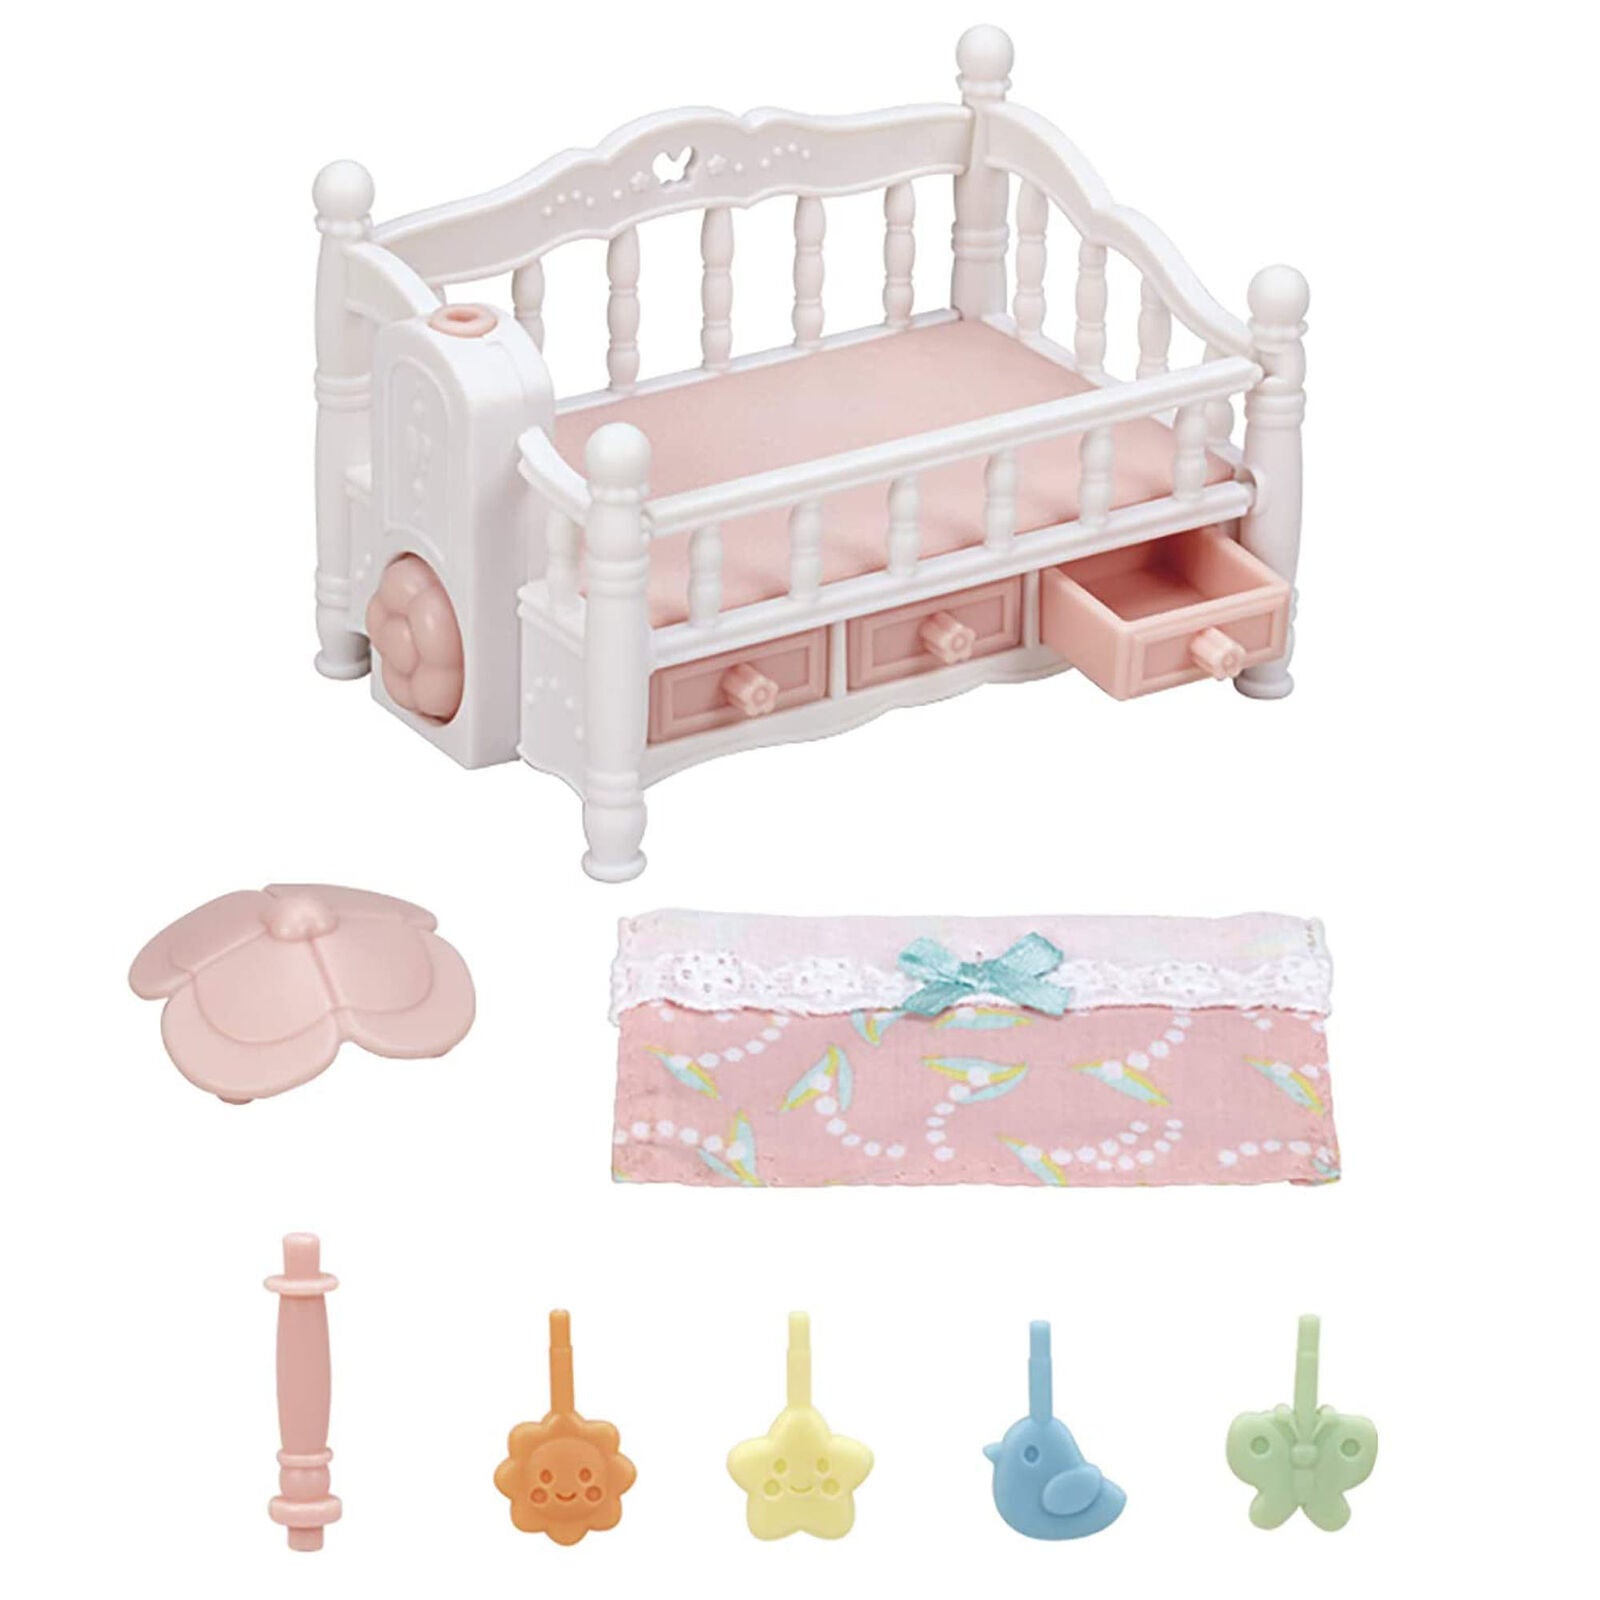 Sylvanian Families Triplets Crib with Mobile & Accessories 5534 Role Play Age 3+